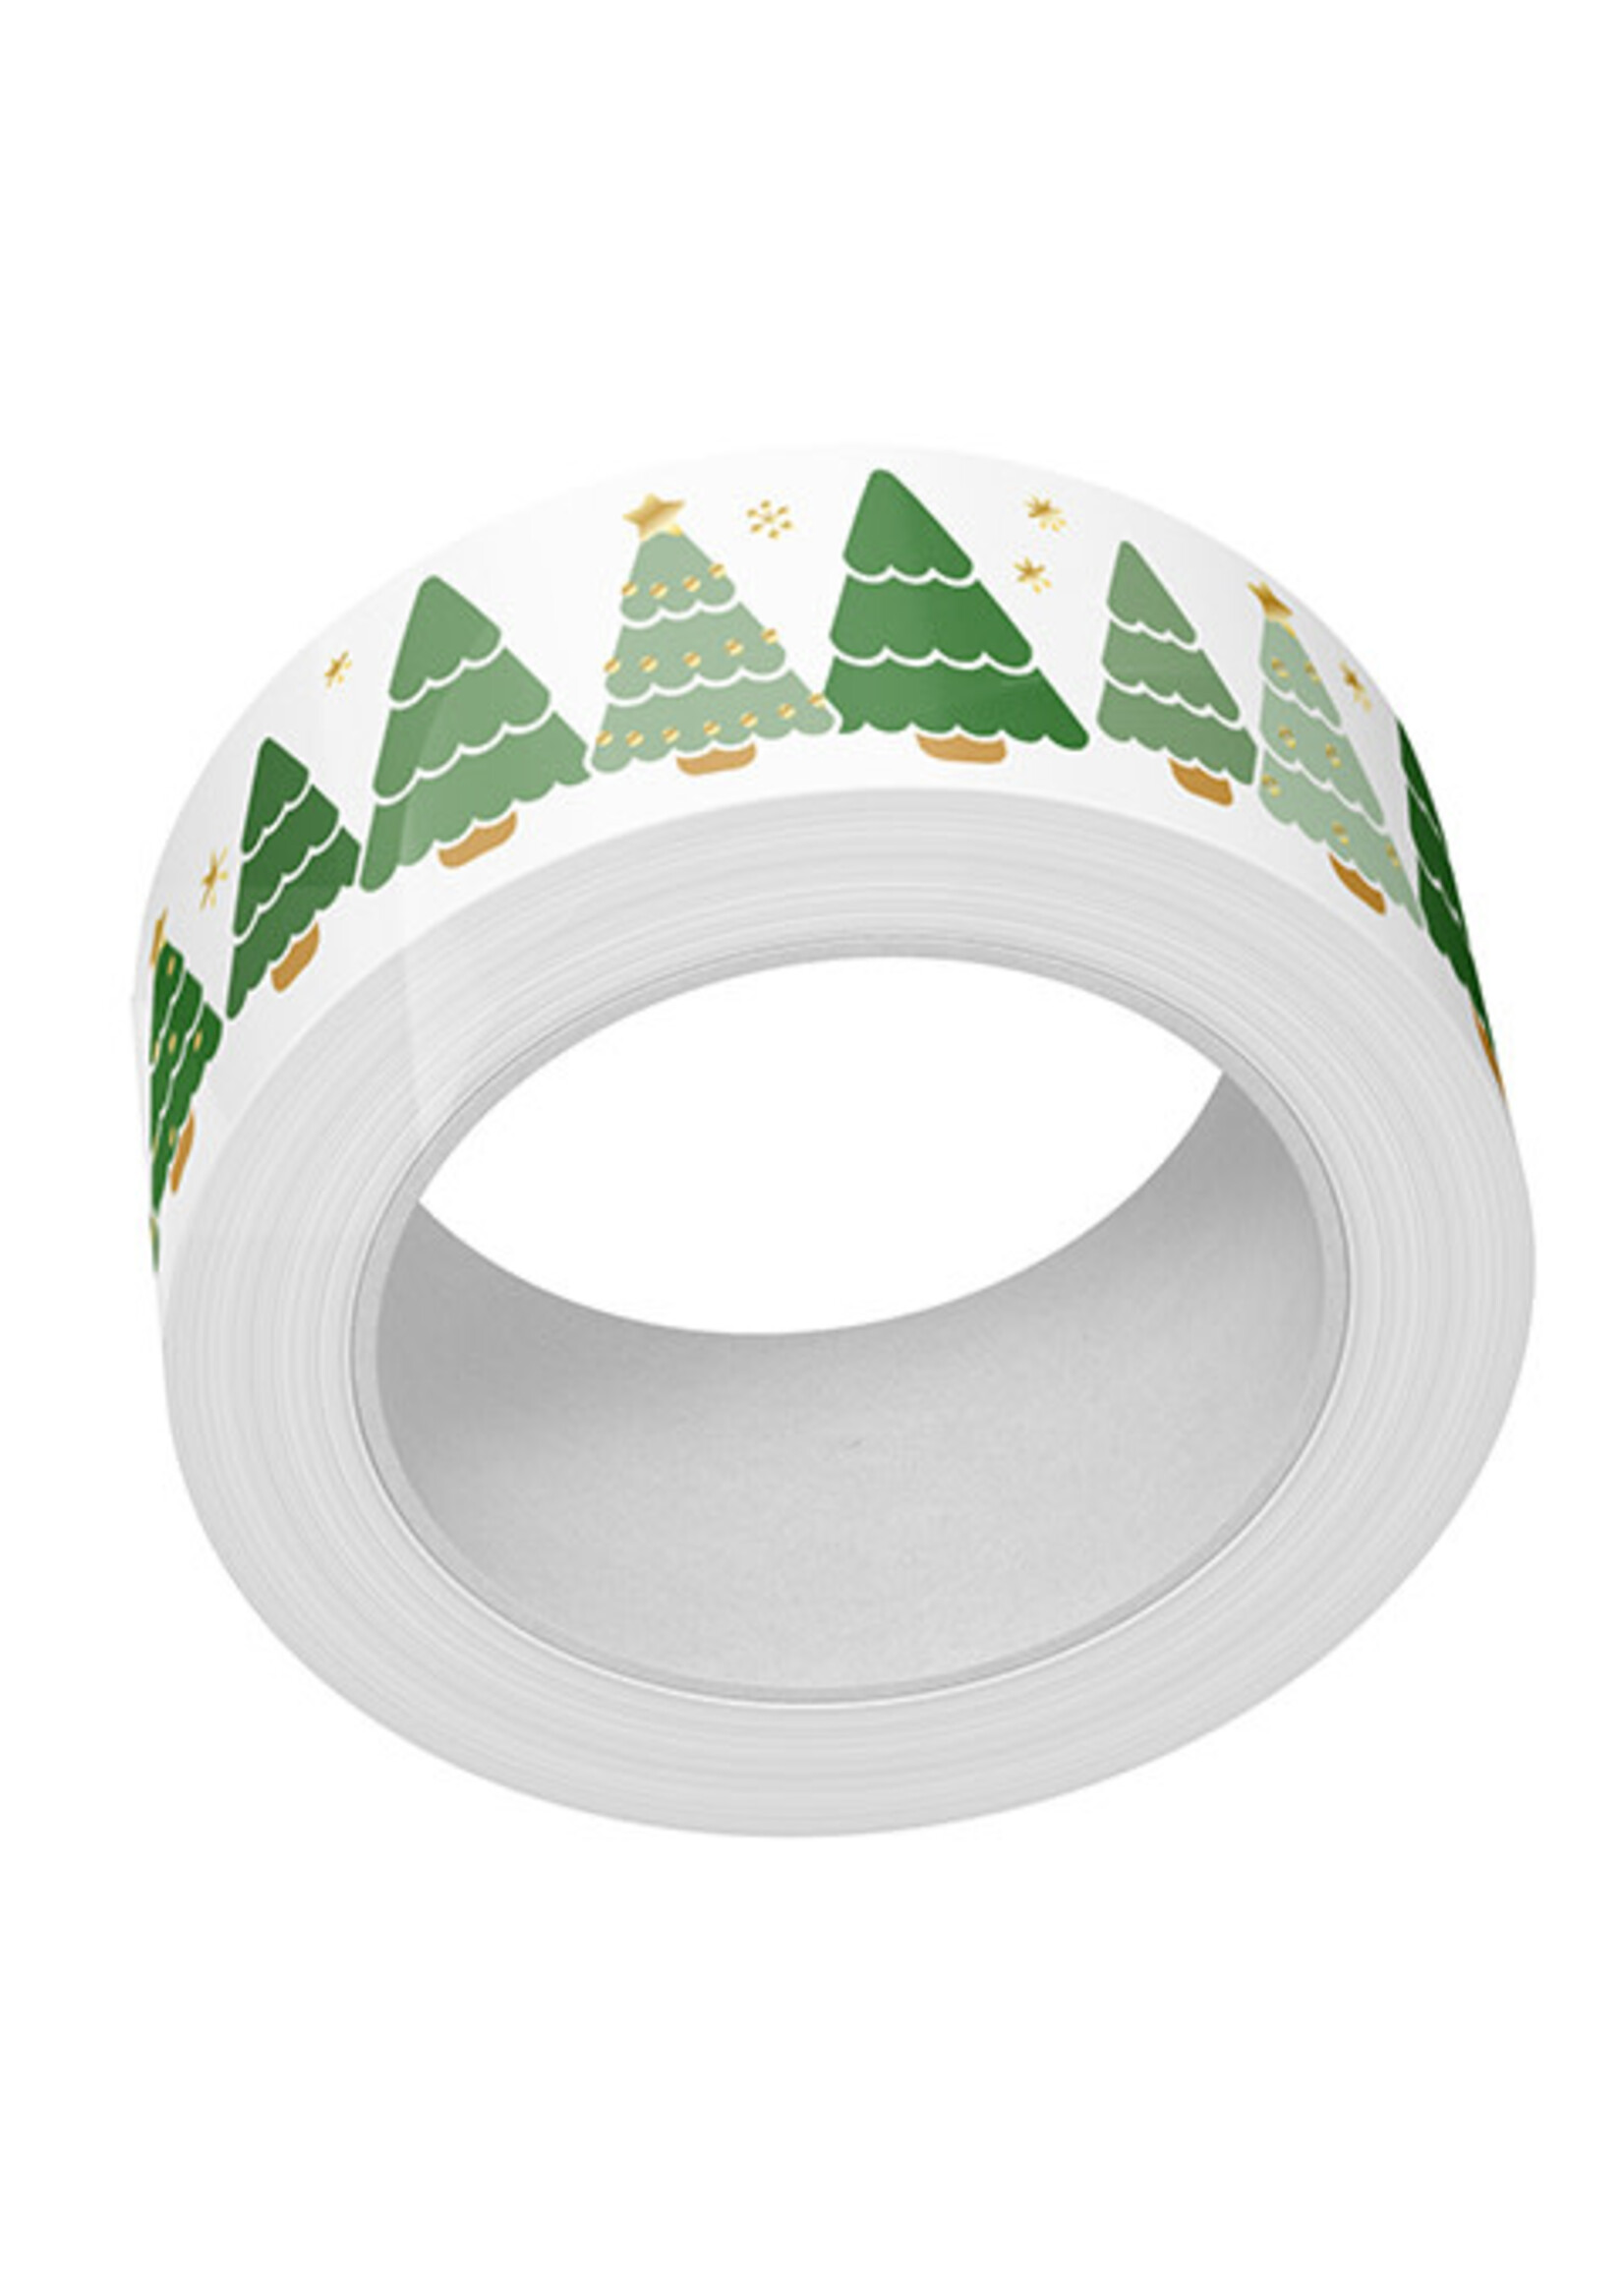 Lawn Fawn christmas tree lot foiled washi tape